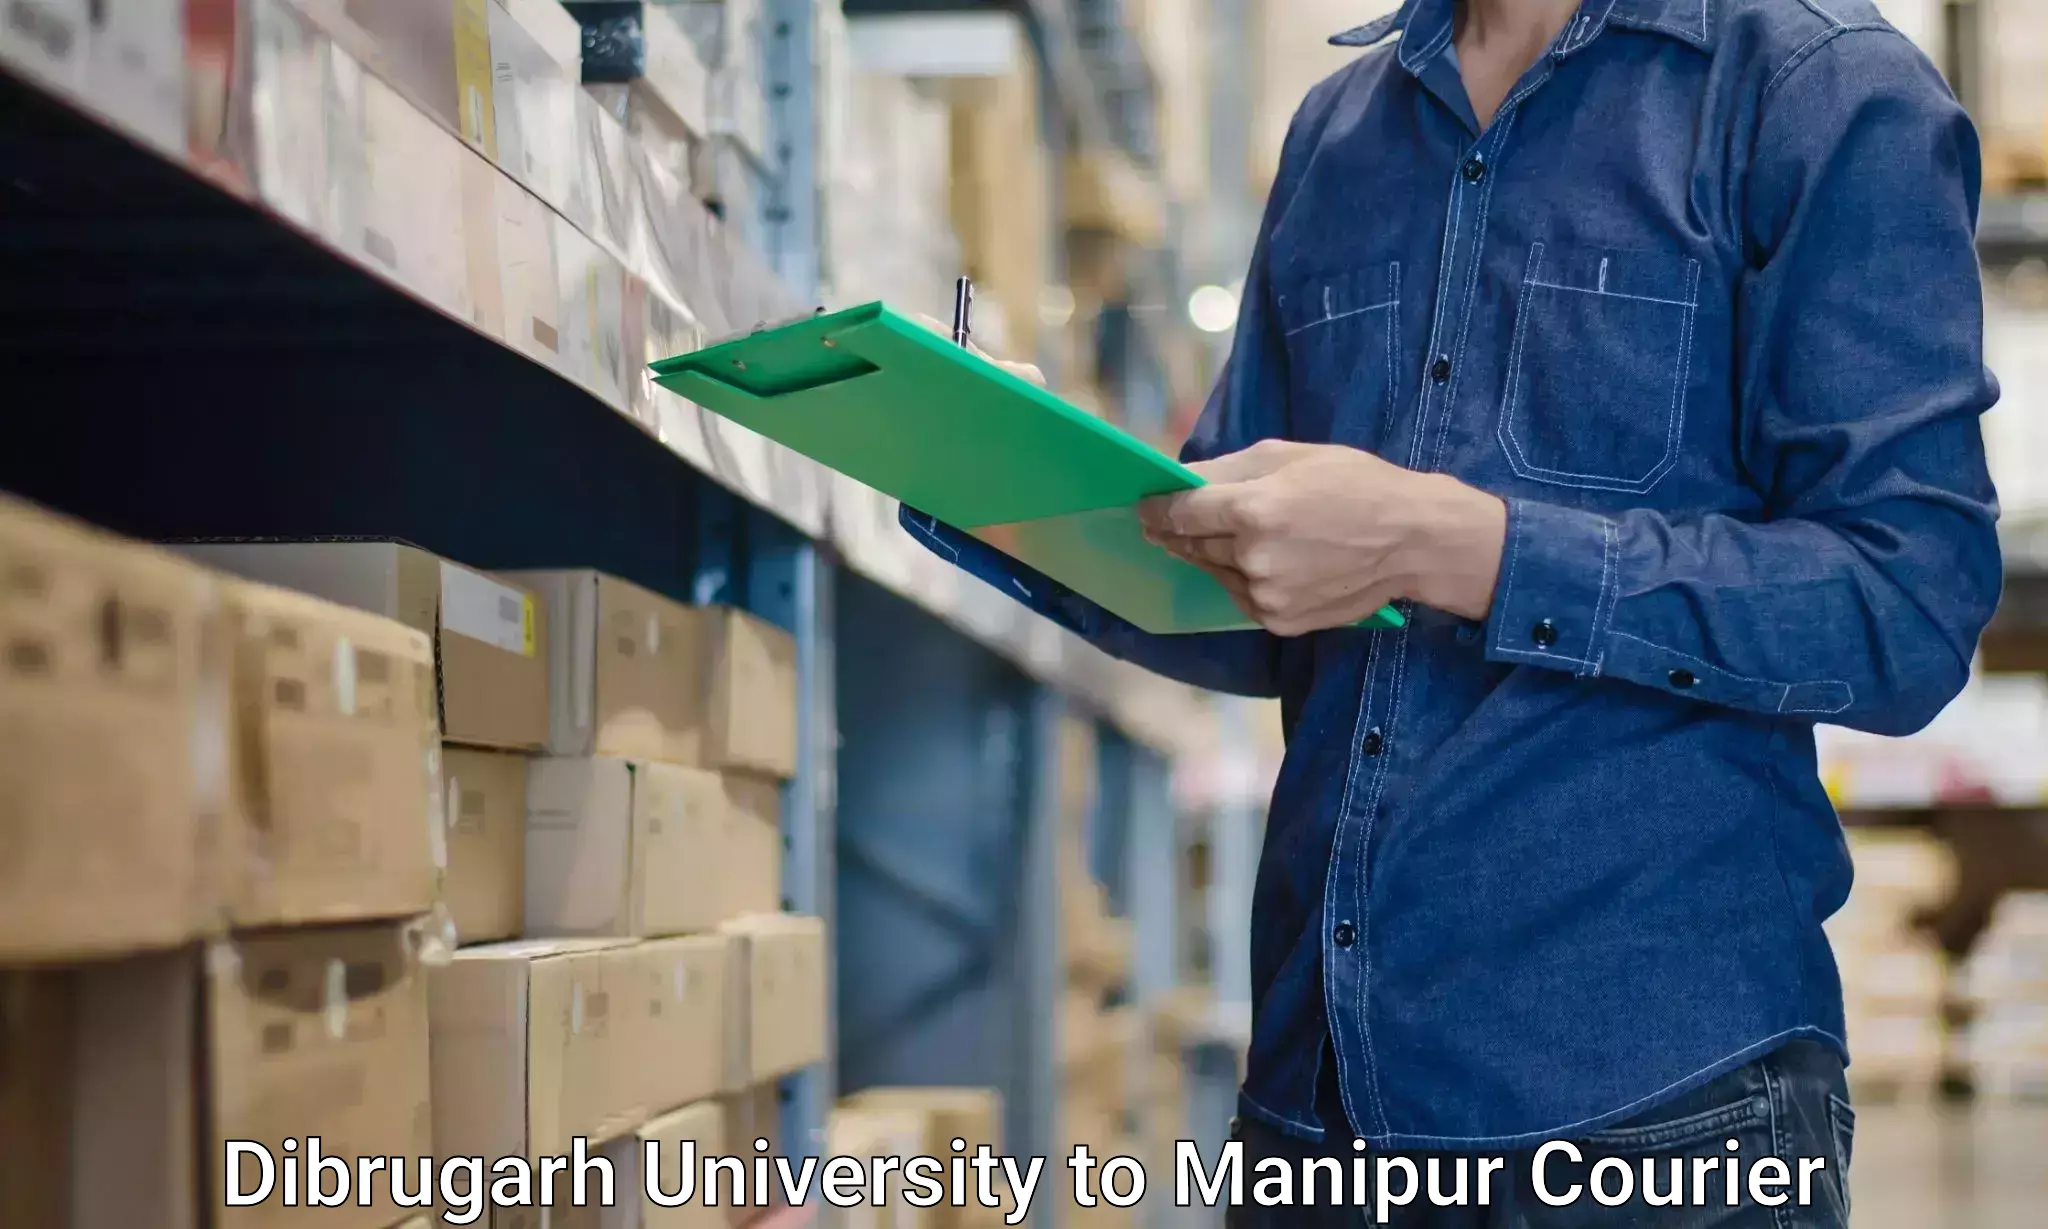 Home goods movers Dibrugarh University to Imphal